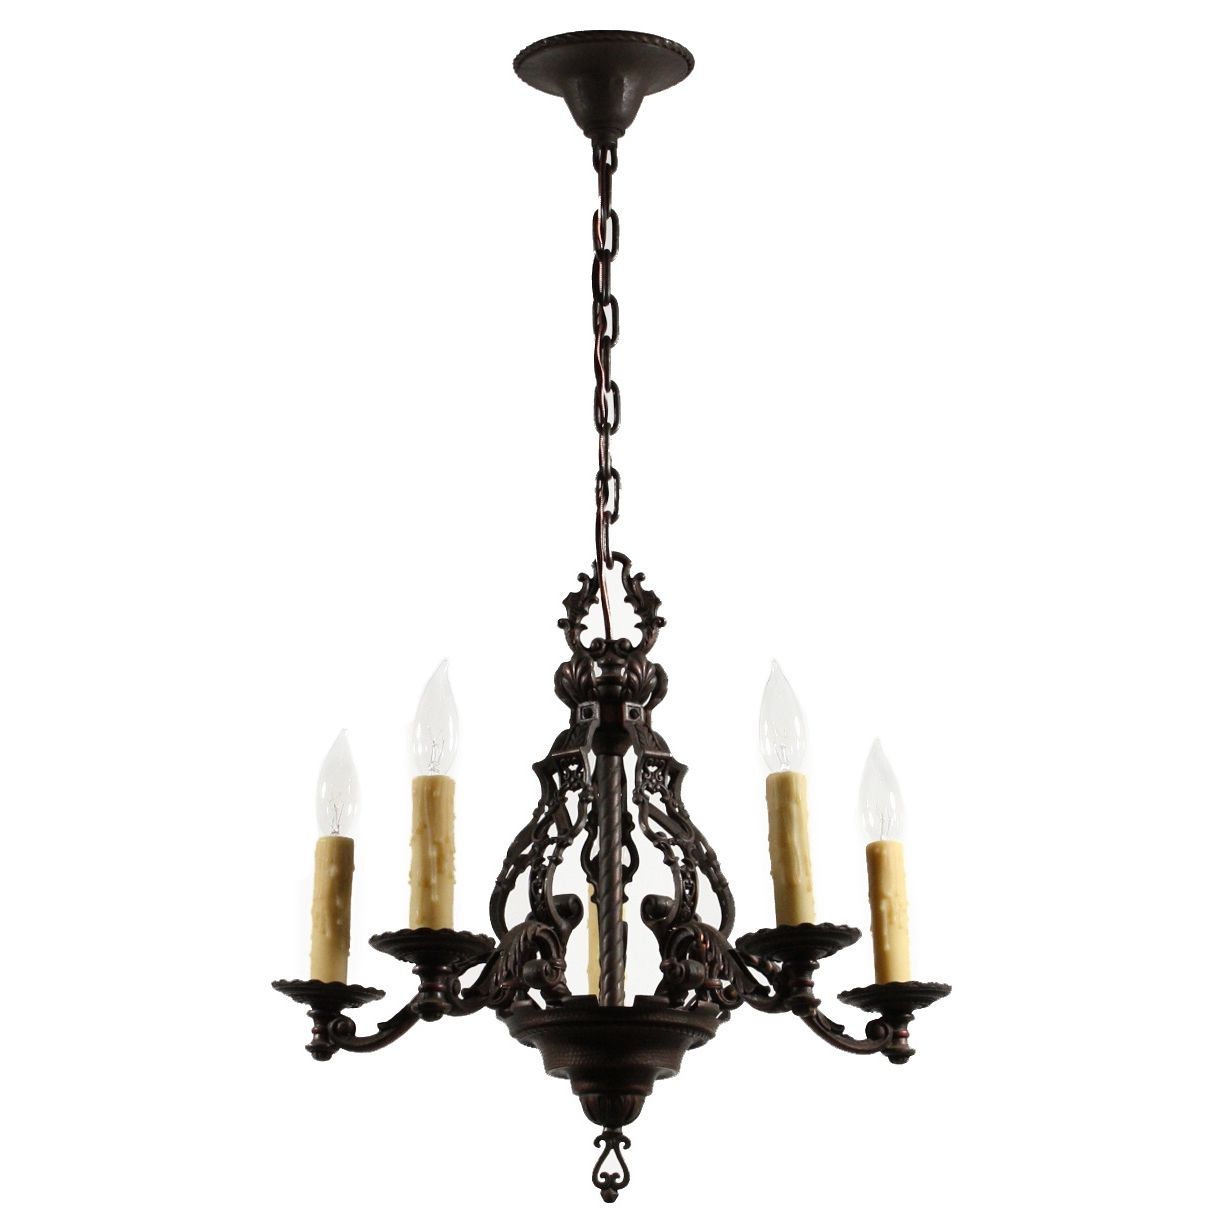 Cast Iron Antique Chandelier With Most Up To Date Magnificent Antique Figural Five Light Chandelier, Cast Iron, Early (View 19 of 20)